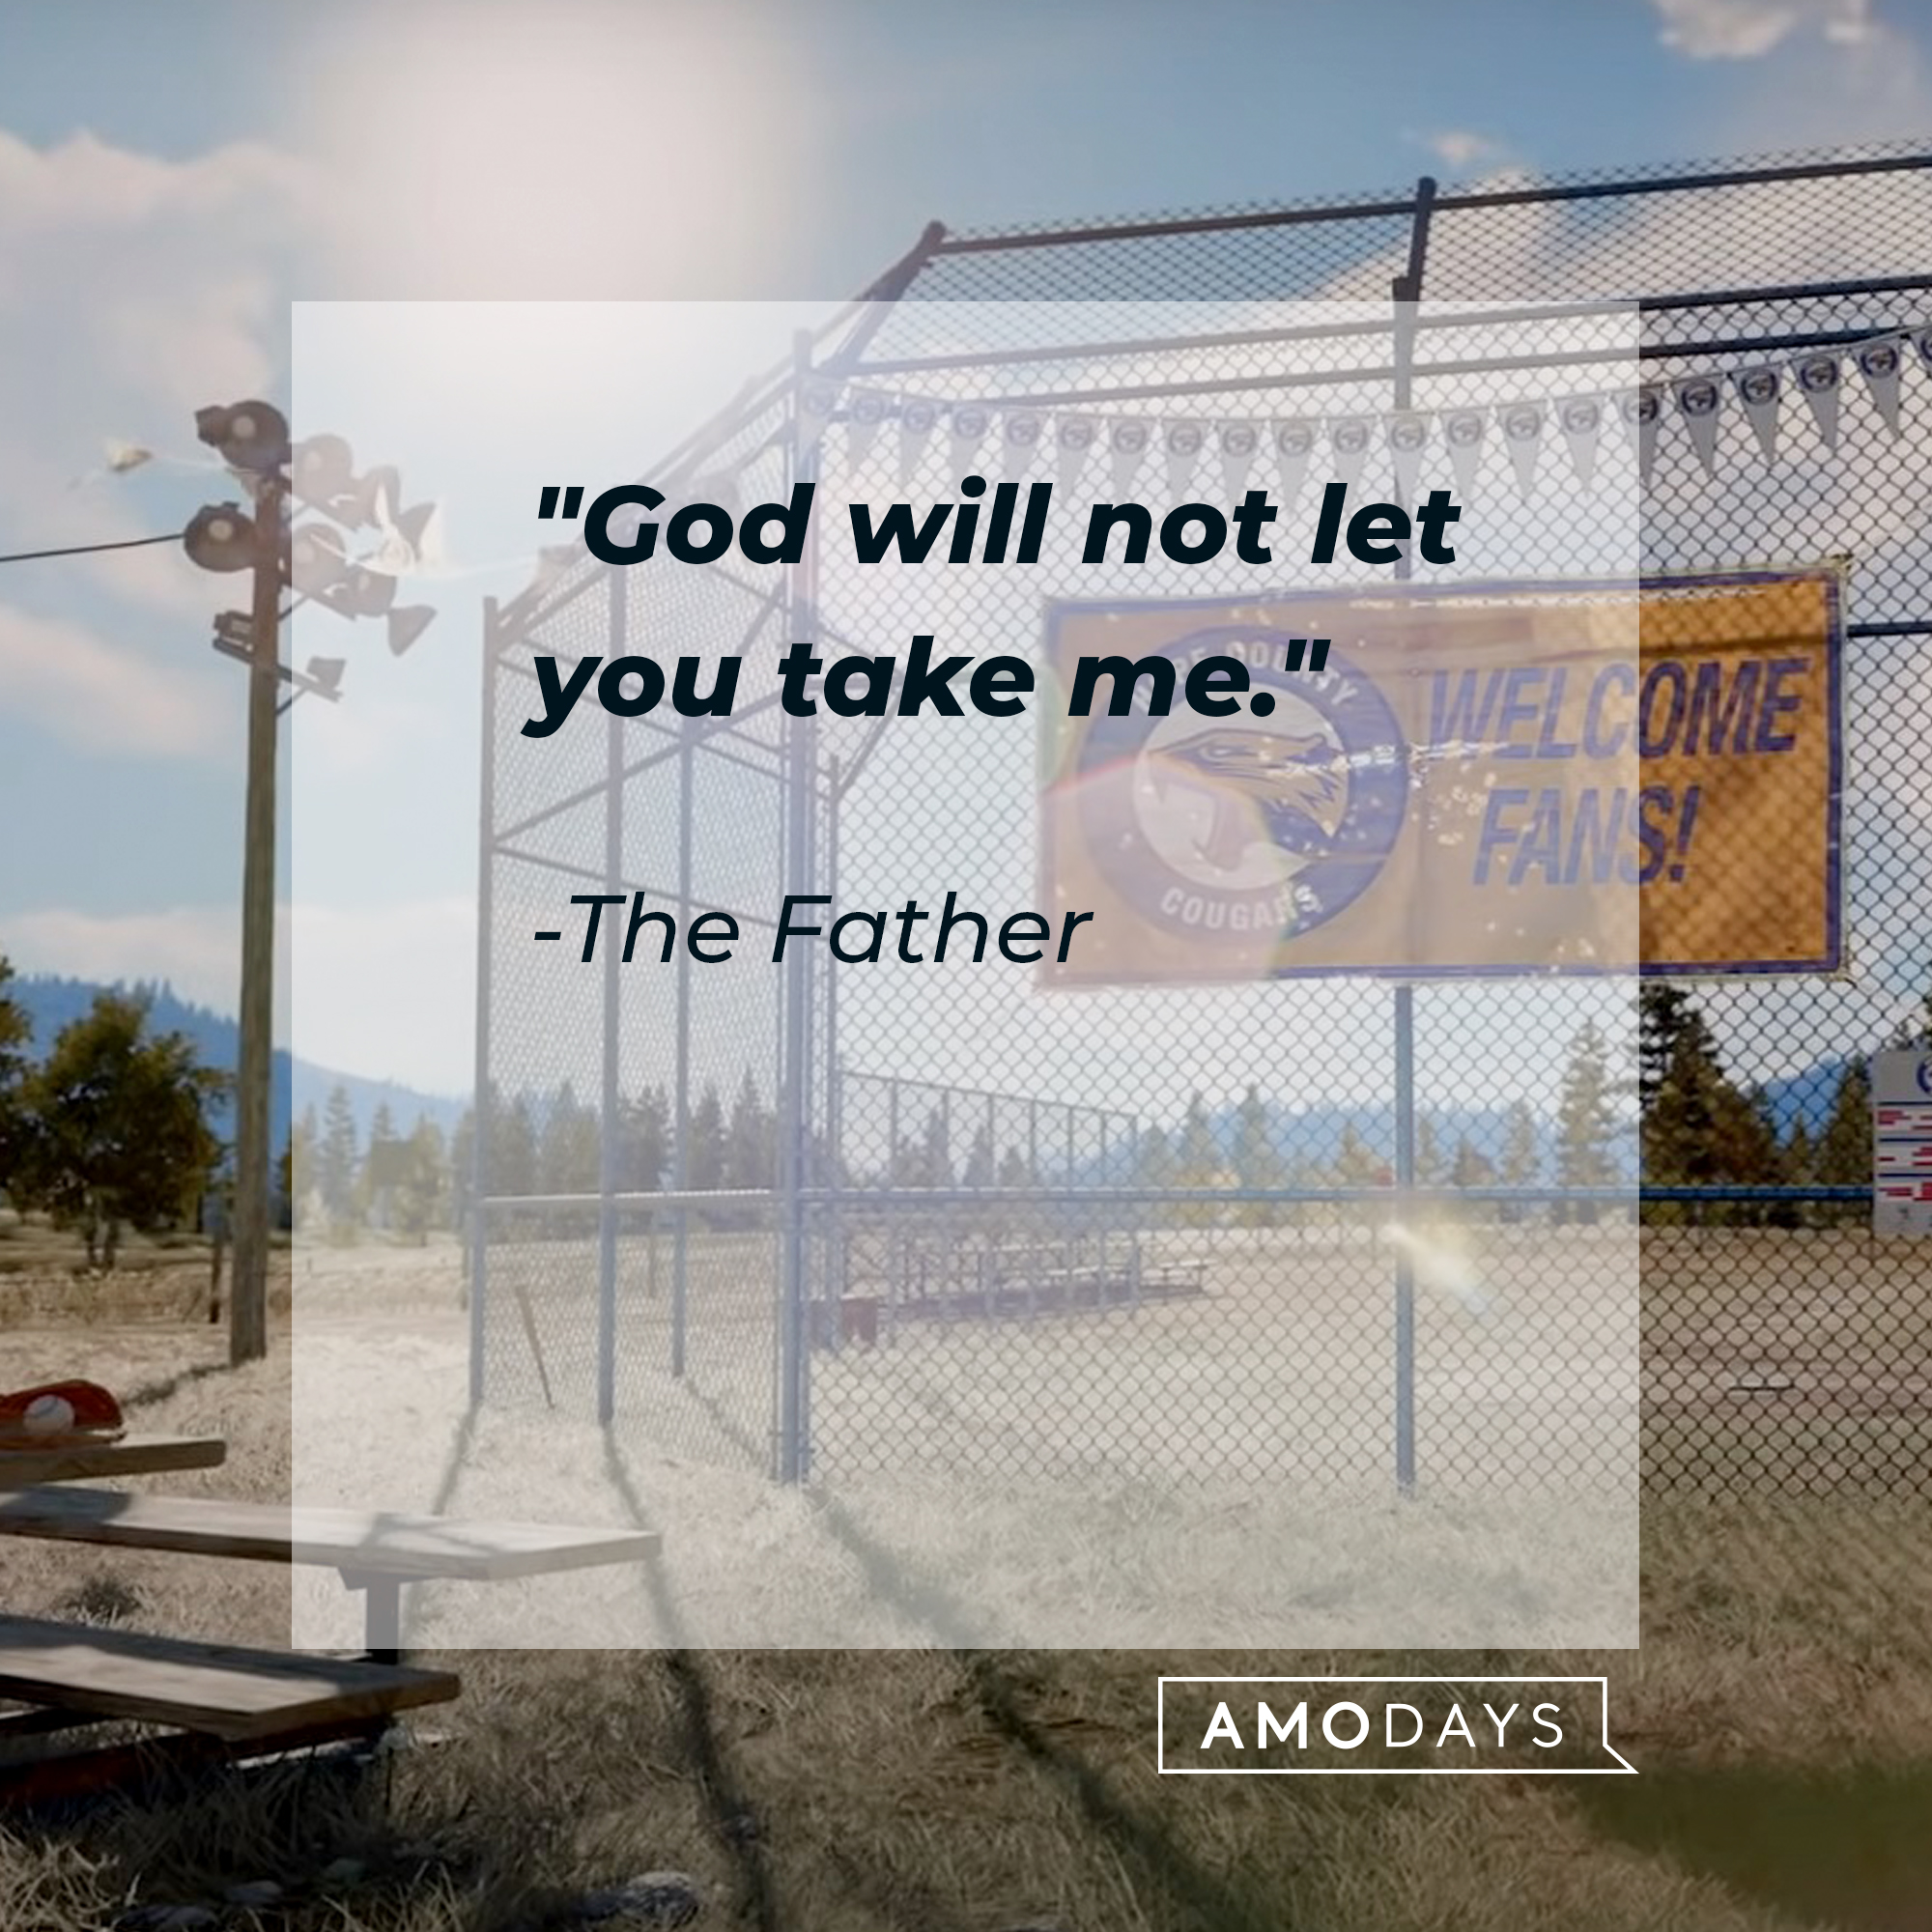 An image of "Far Cry 5" with The Father's quote: "God will not let you take me." | Source: youtube.com/Ubisoft North America